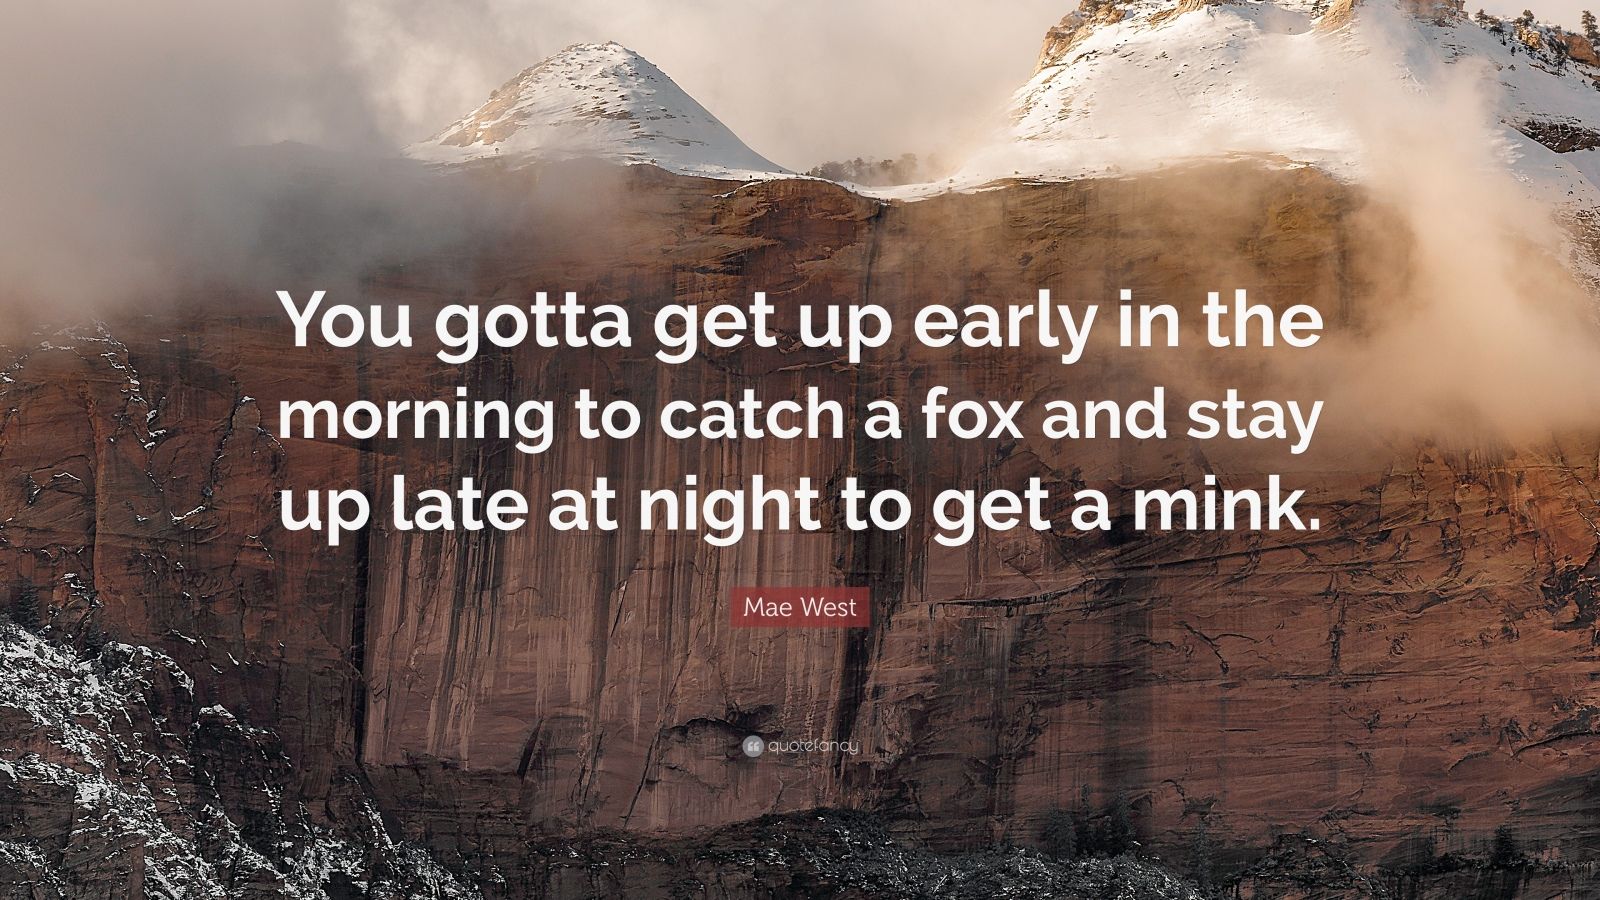 Mae West Quote: “You gotta get up early in the morning to catch a fox